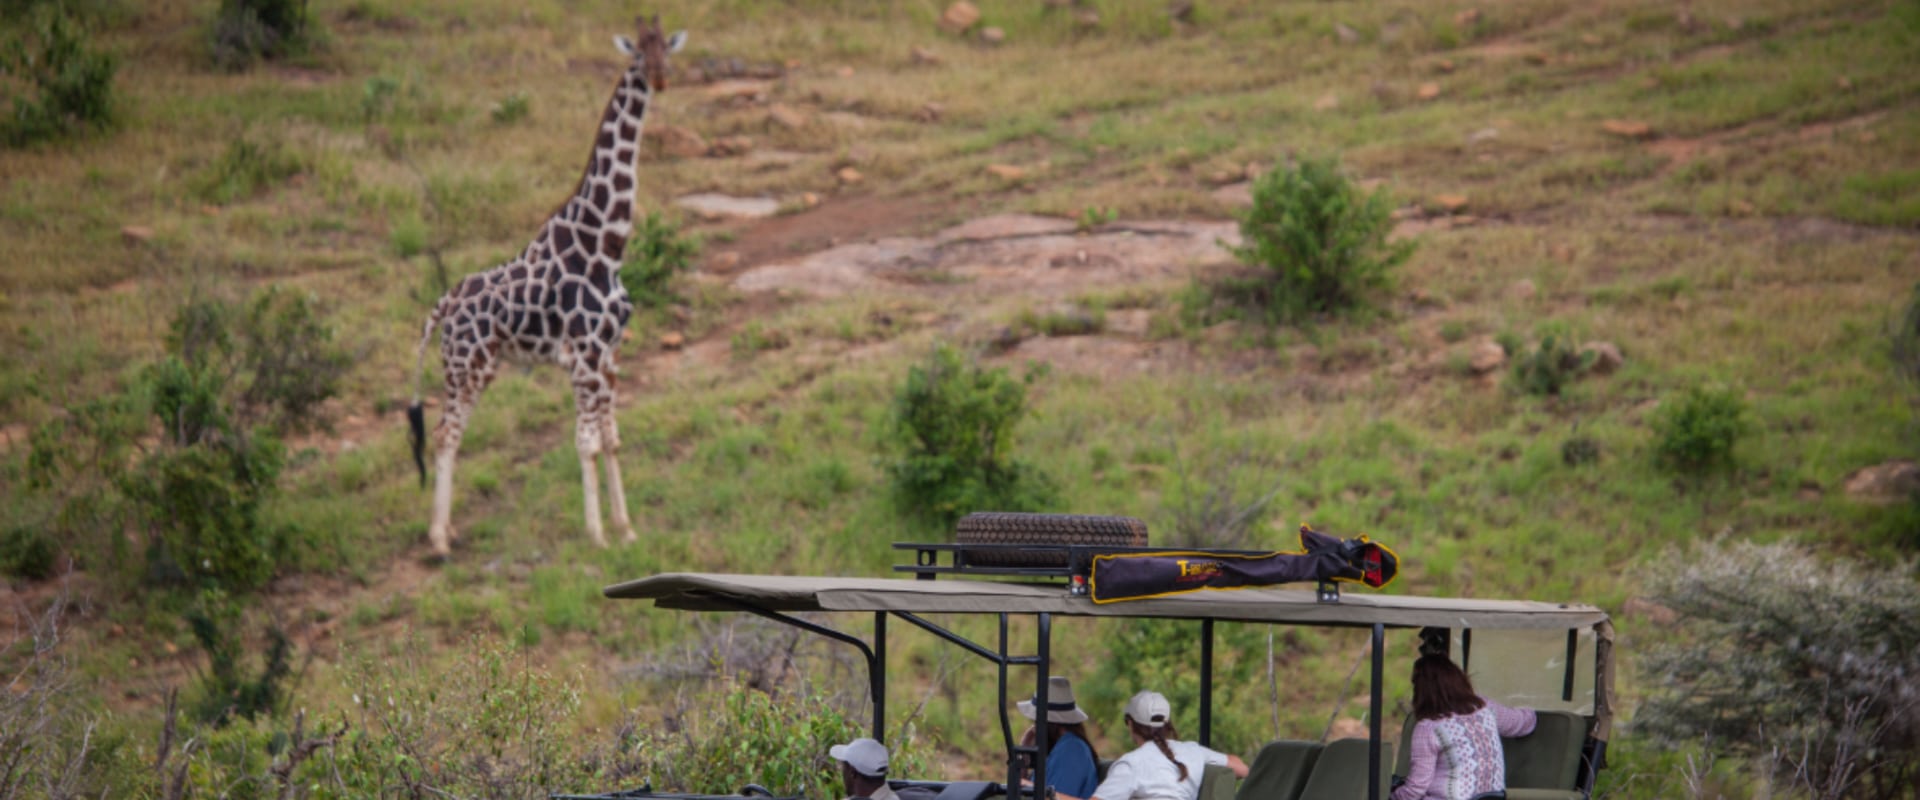 Traditional game drives on the Laikipia plains